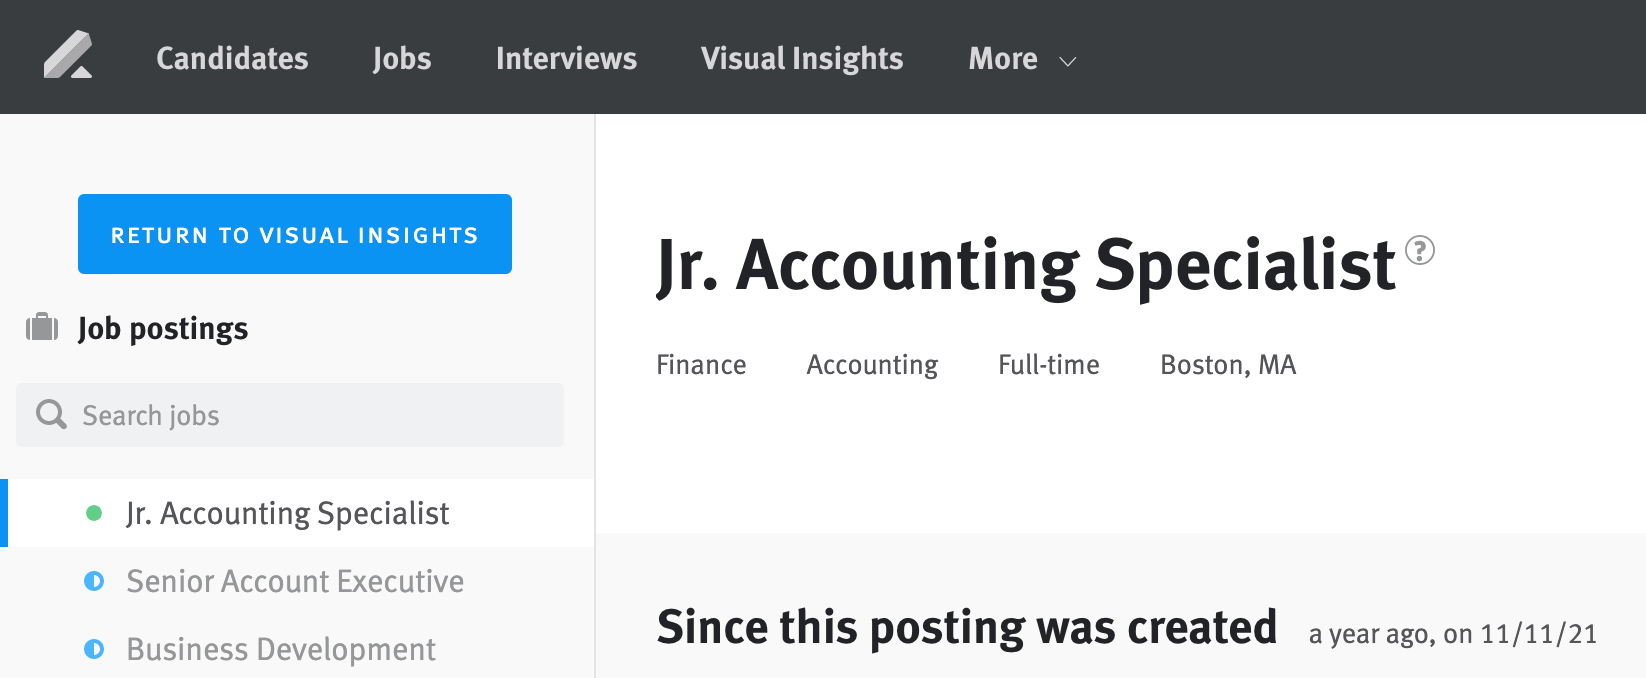 Return to Visual Insights toggle at the top of the left-side navigation column in the legacy reporting view.